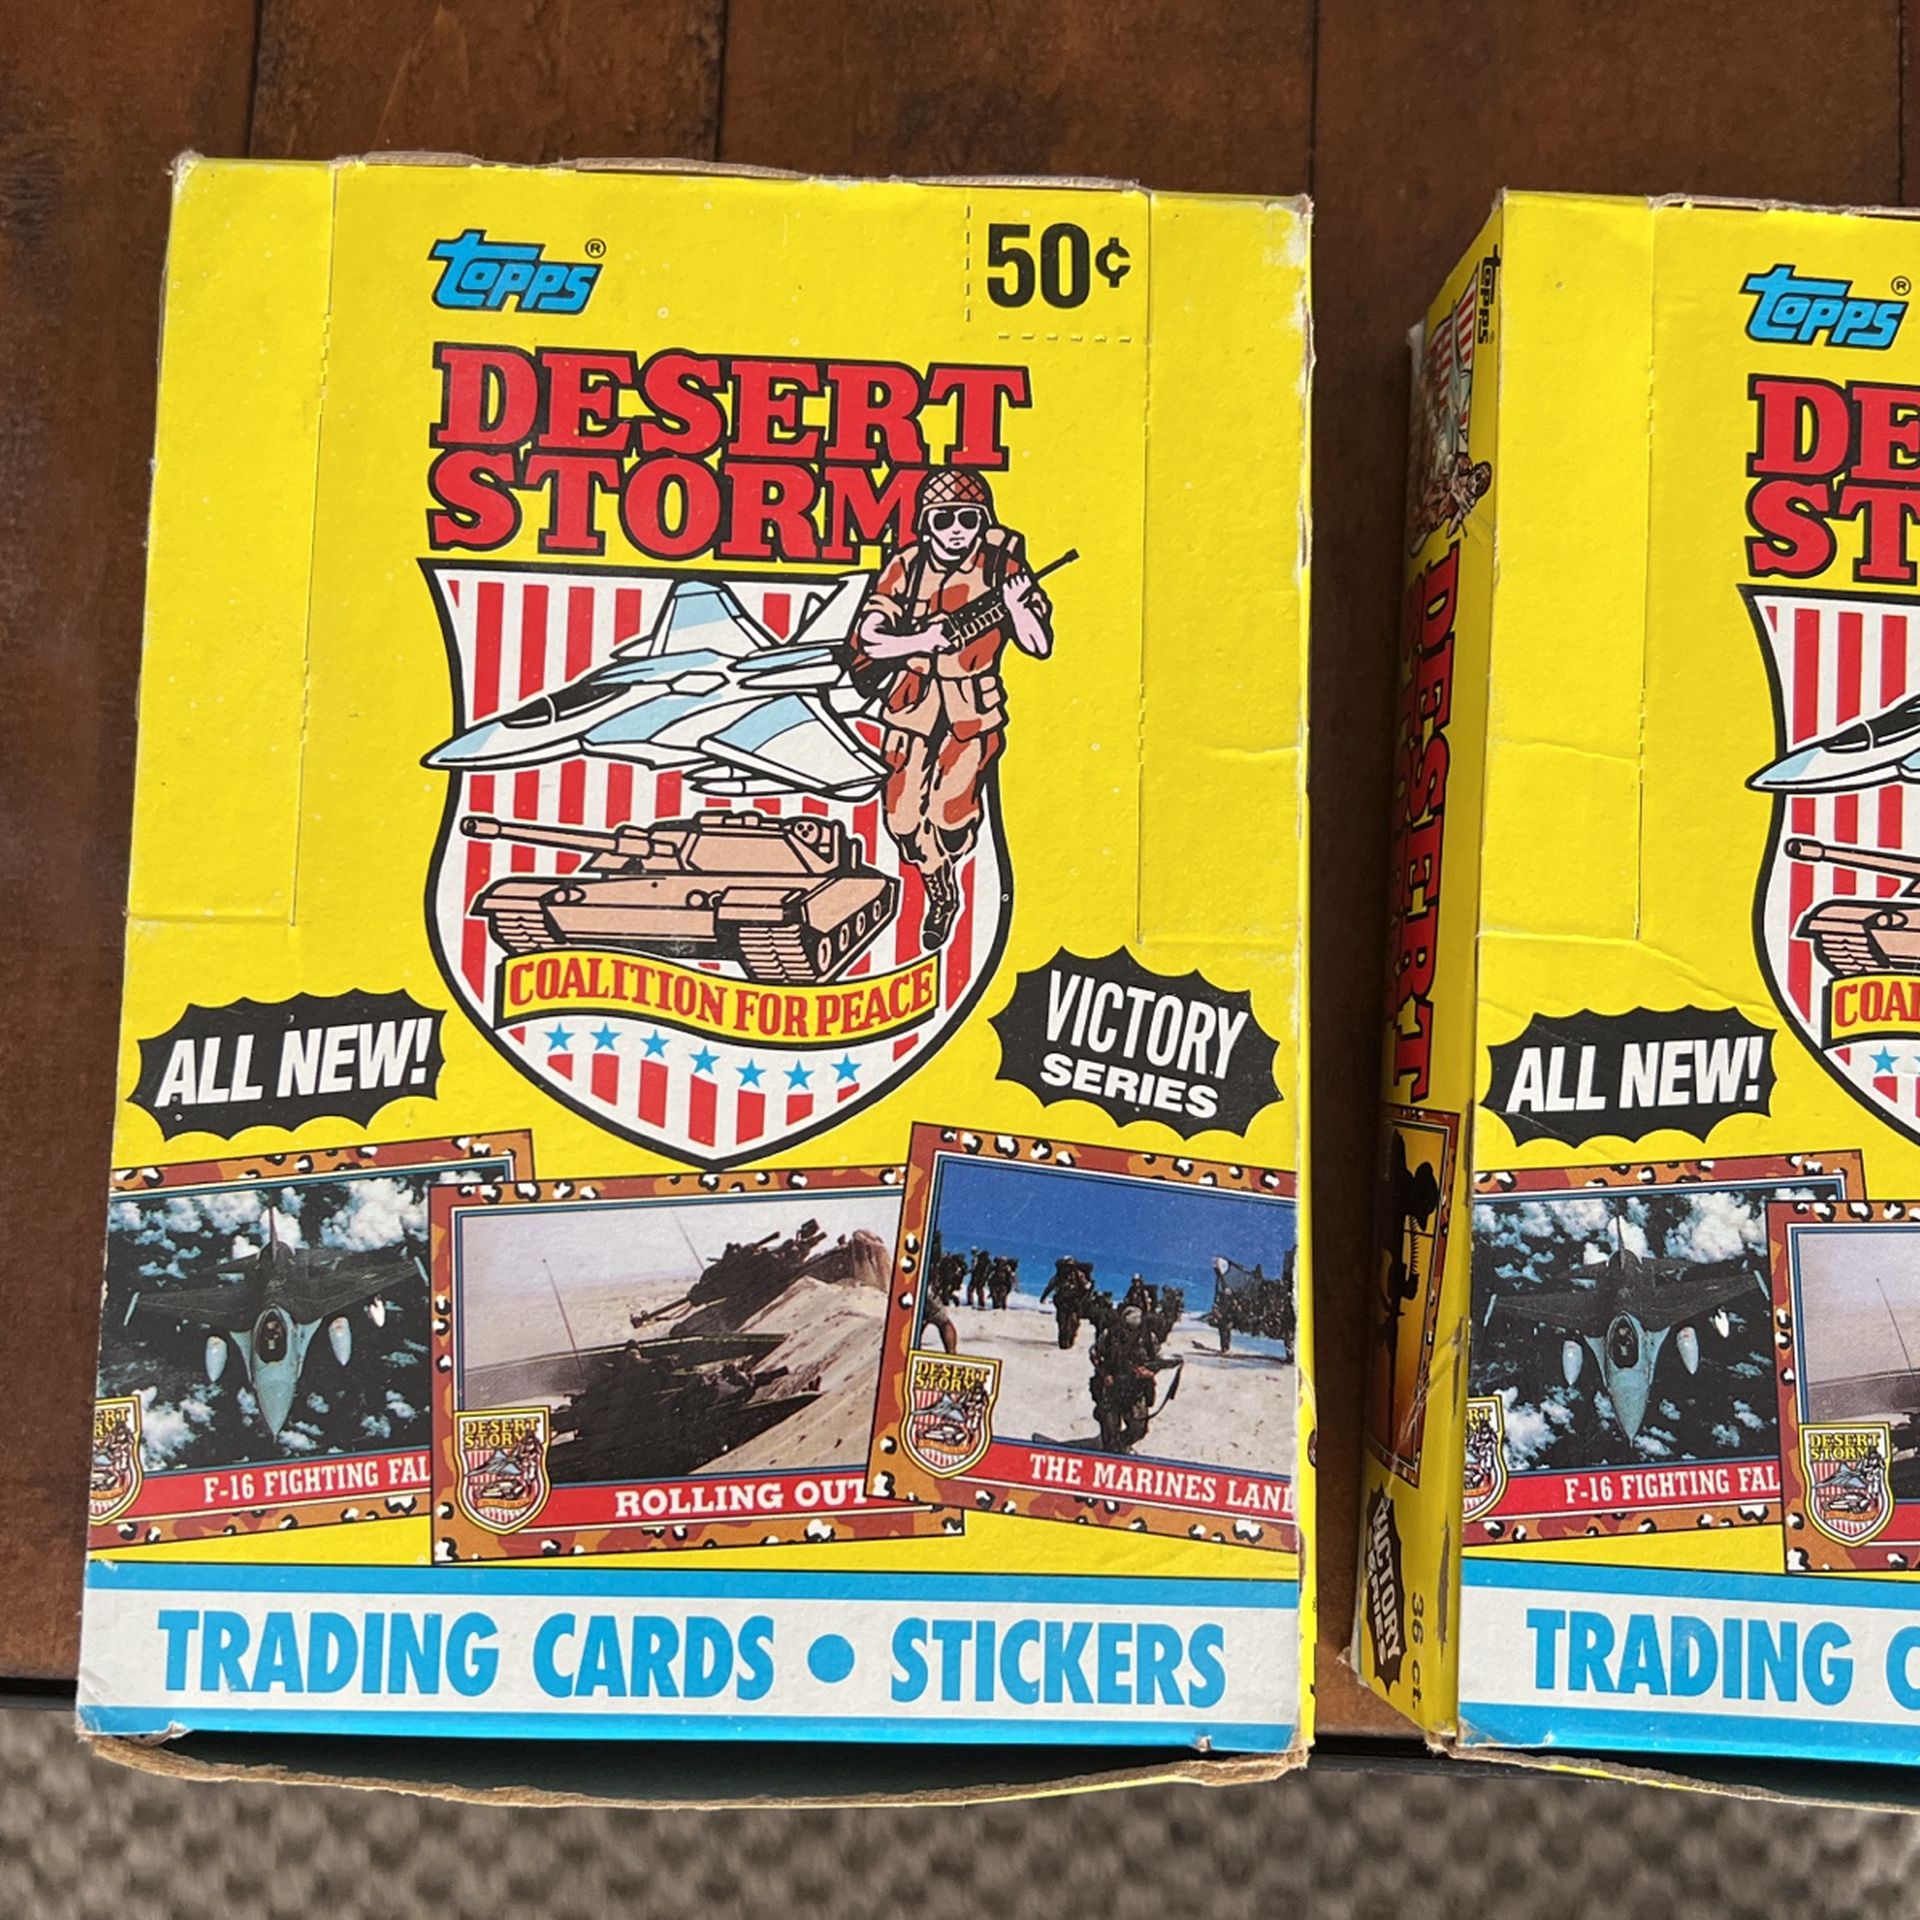 Desert Storm Victory Series Trading Cards